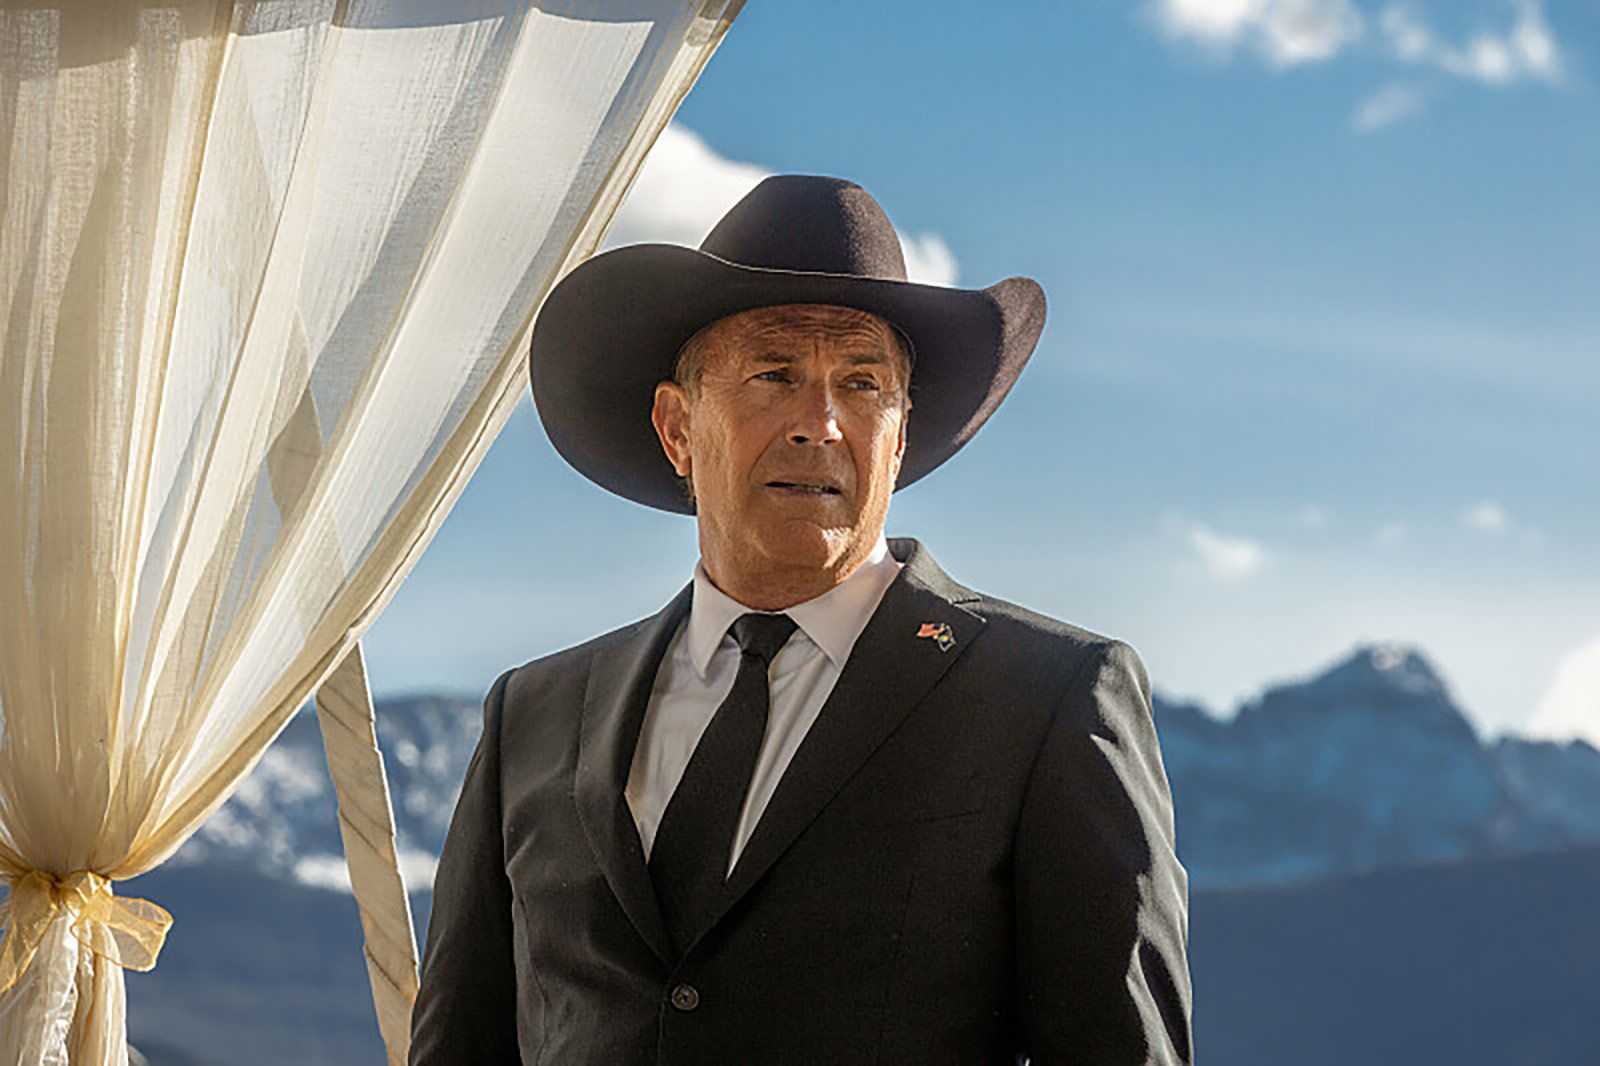 Kevin Costner's departure rocked Yellowstone: What's next for the series?